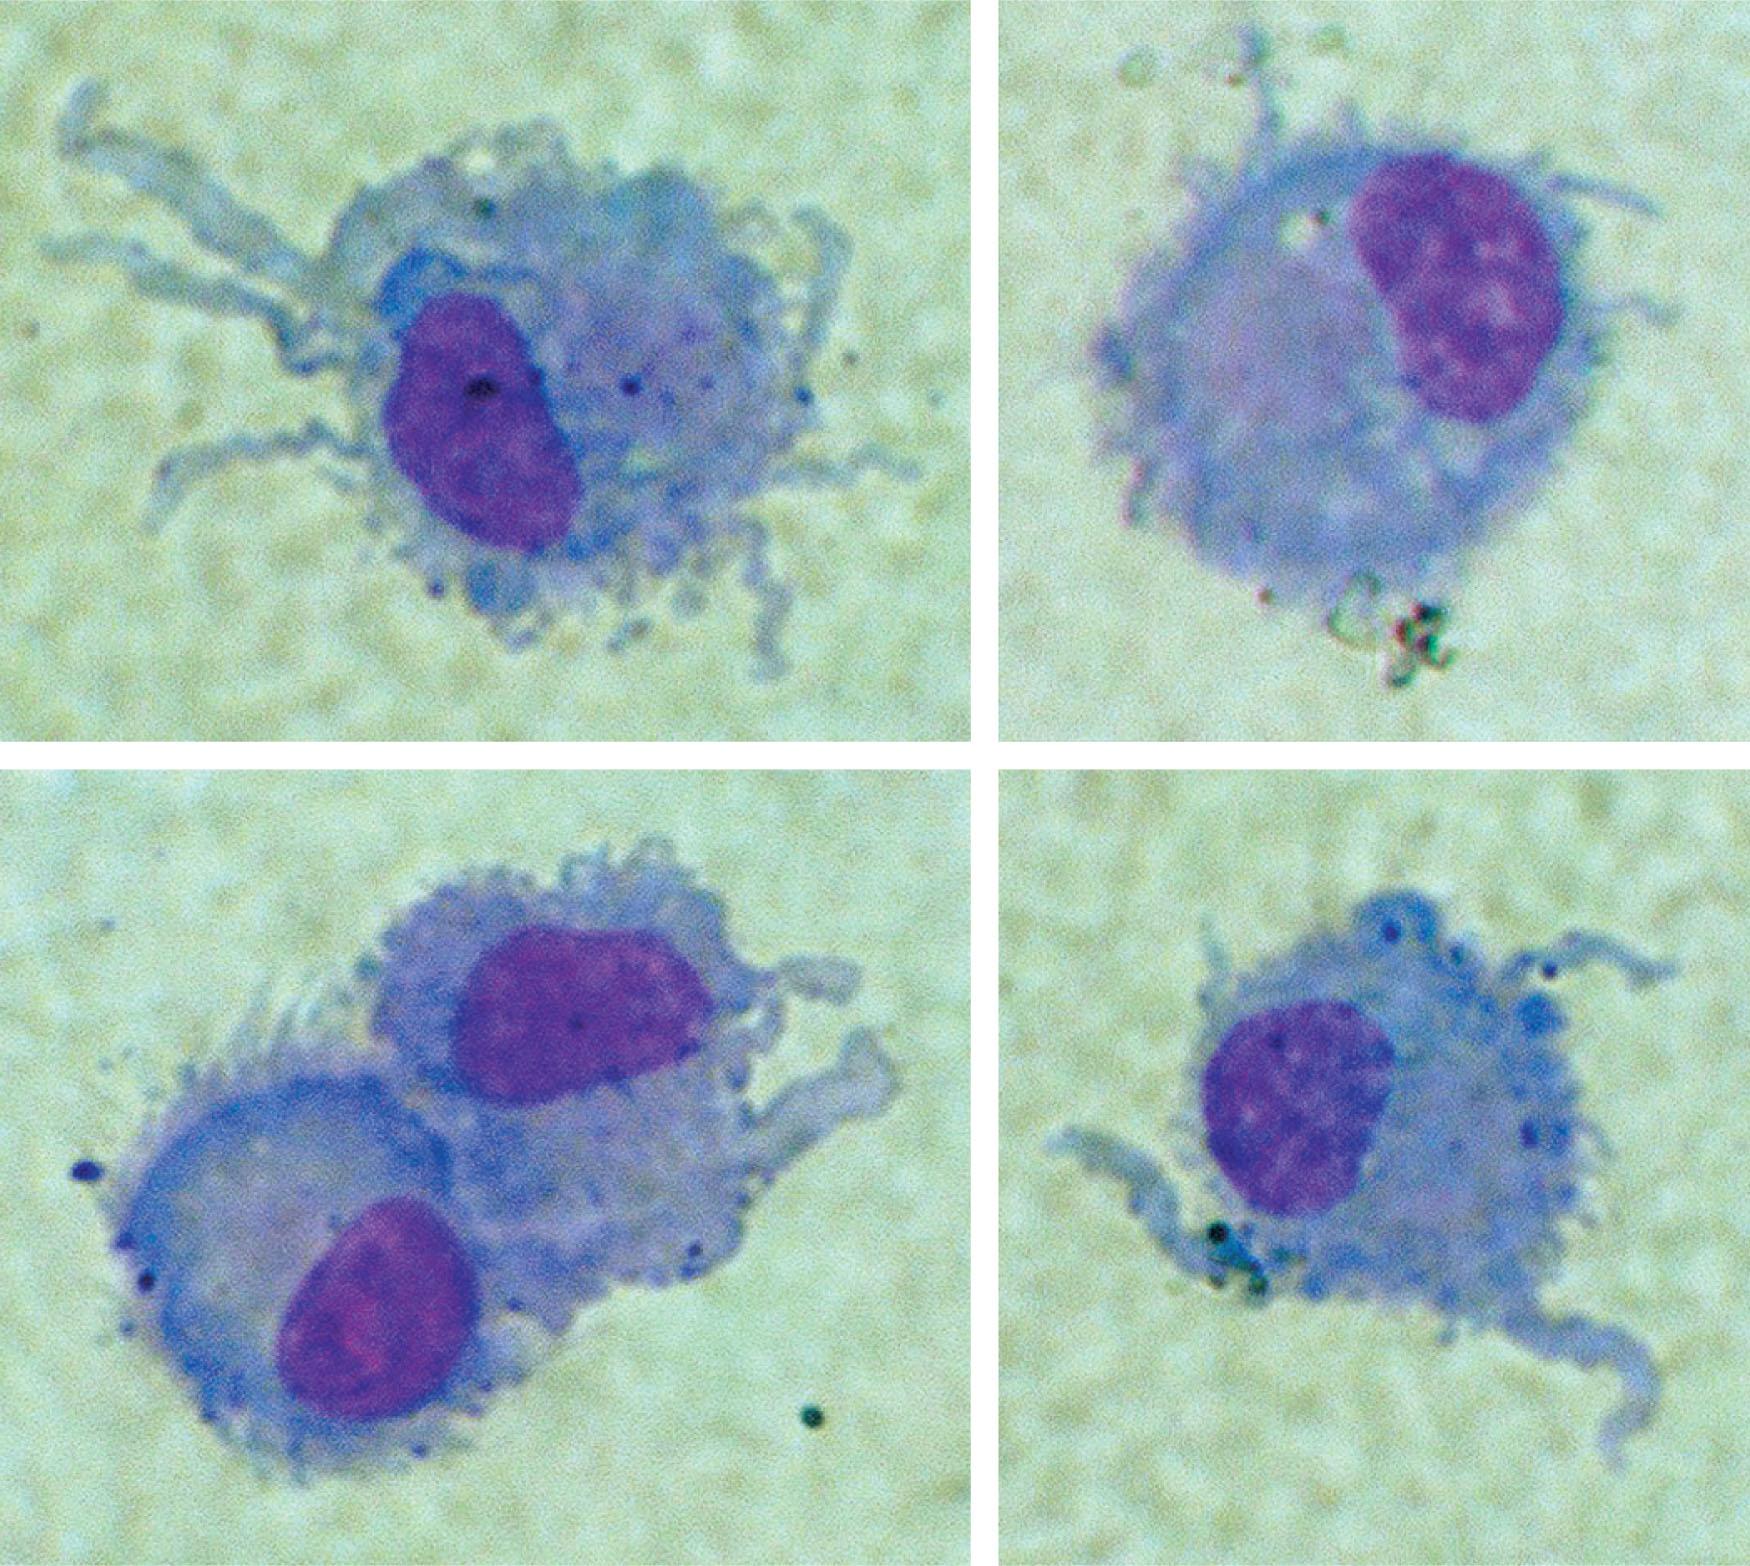 Figure 20.2, EXAMPLES OF MONOCYTE-DERIVED MATURE DENDRITIC CELLS.